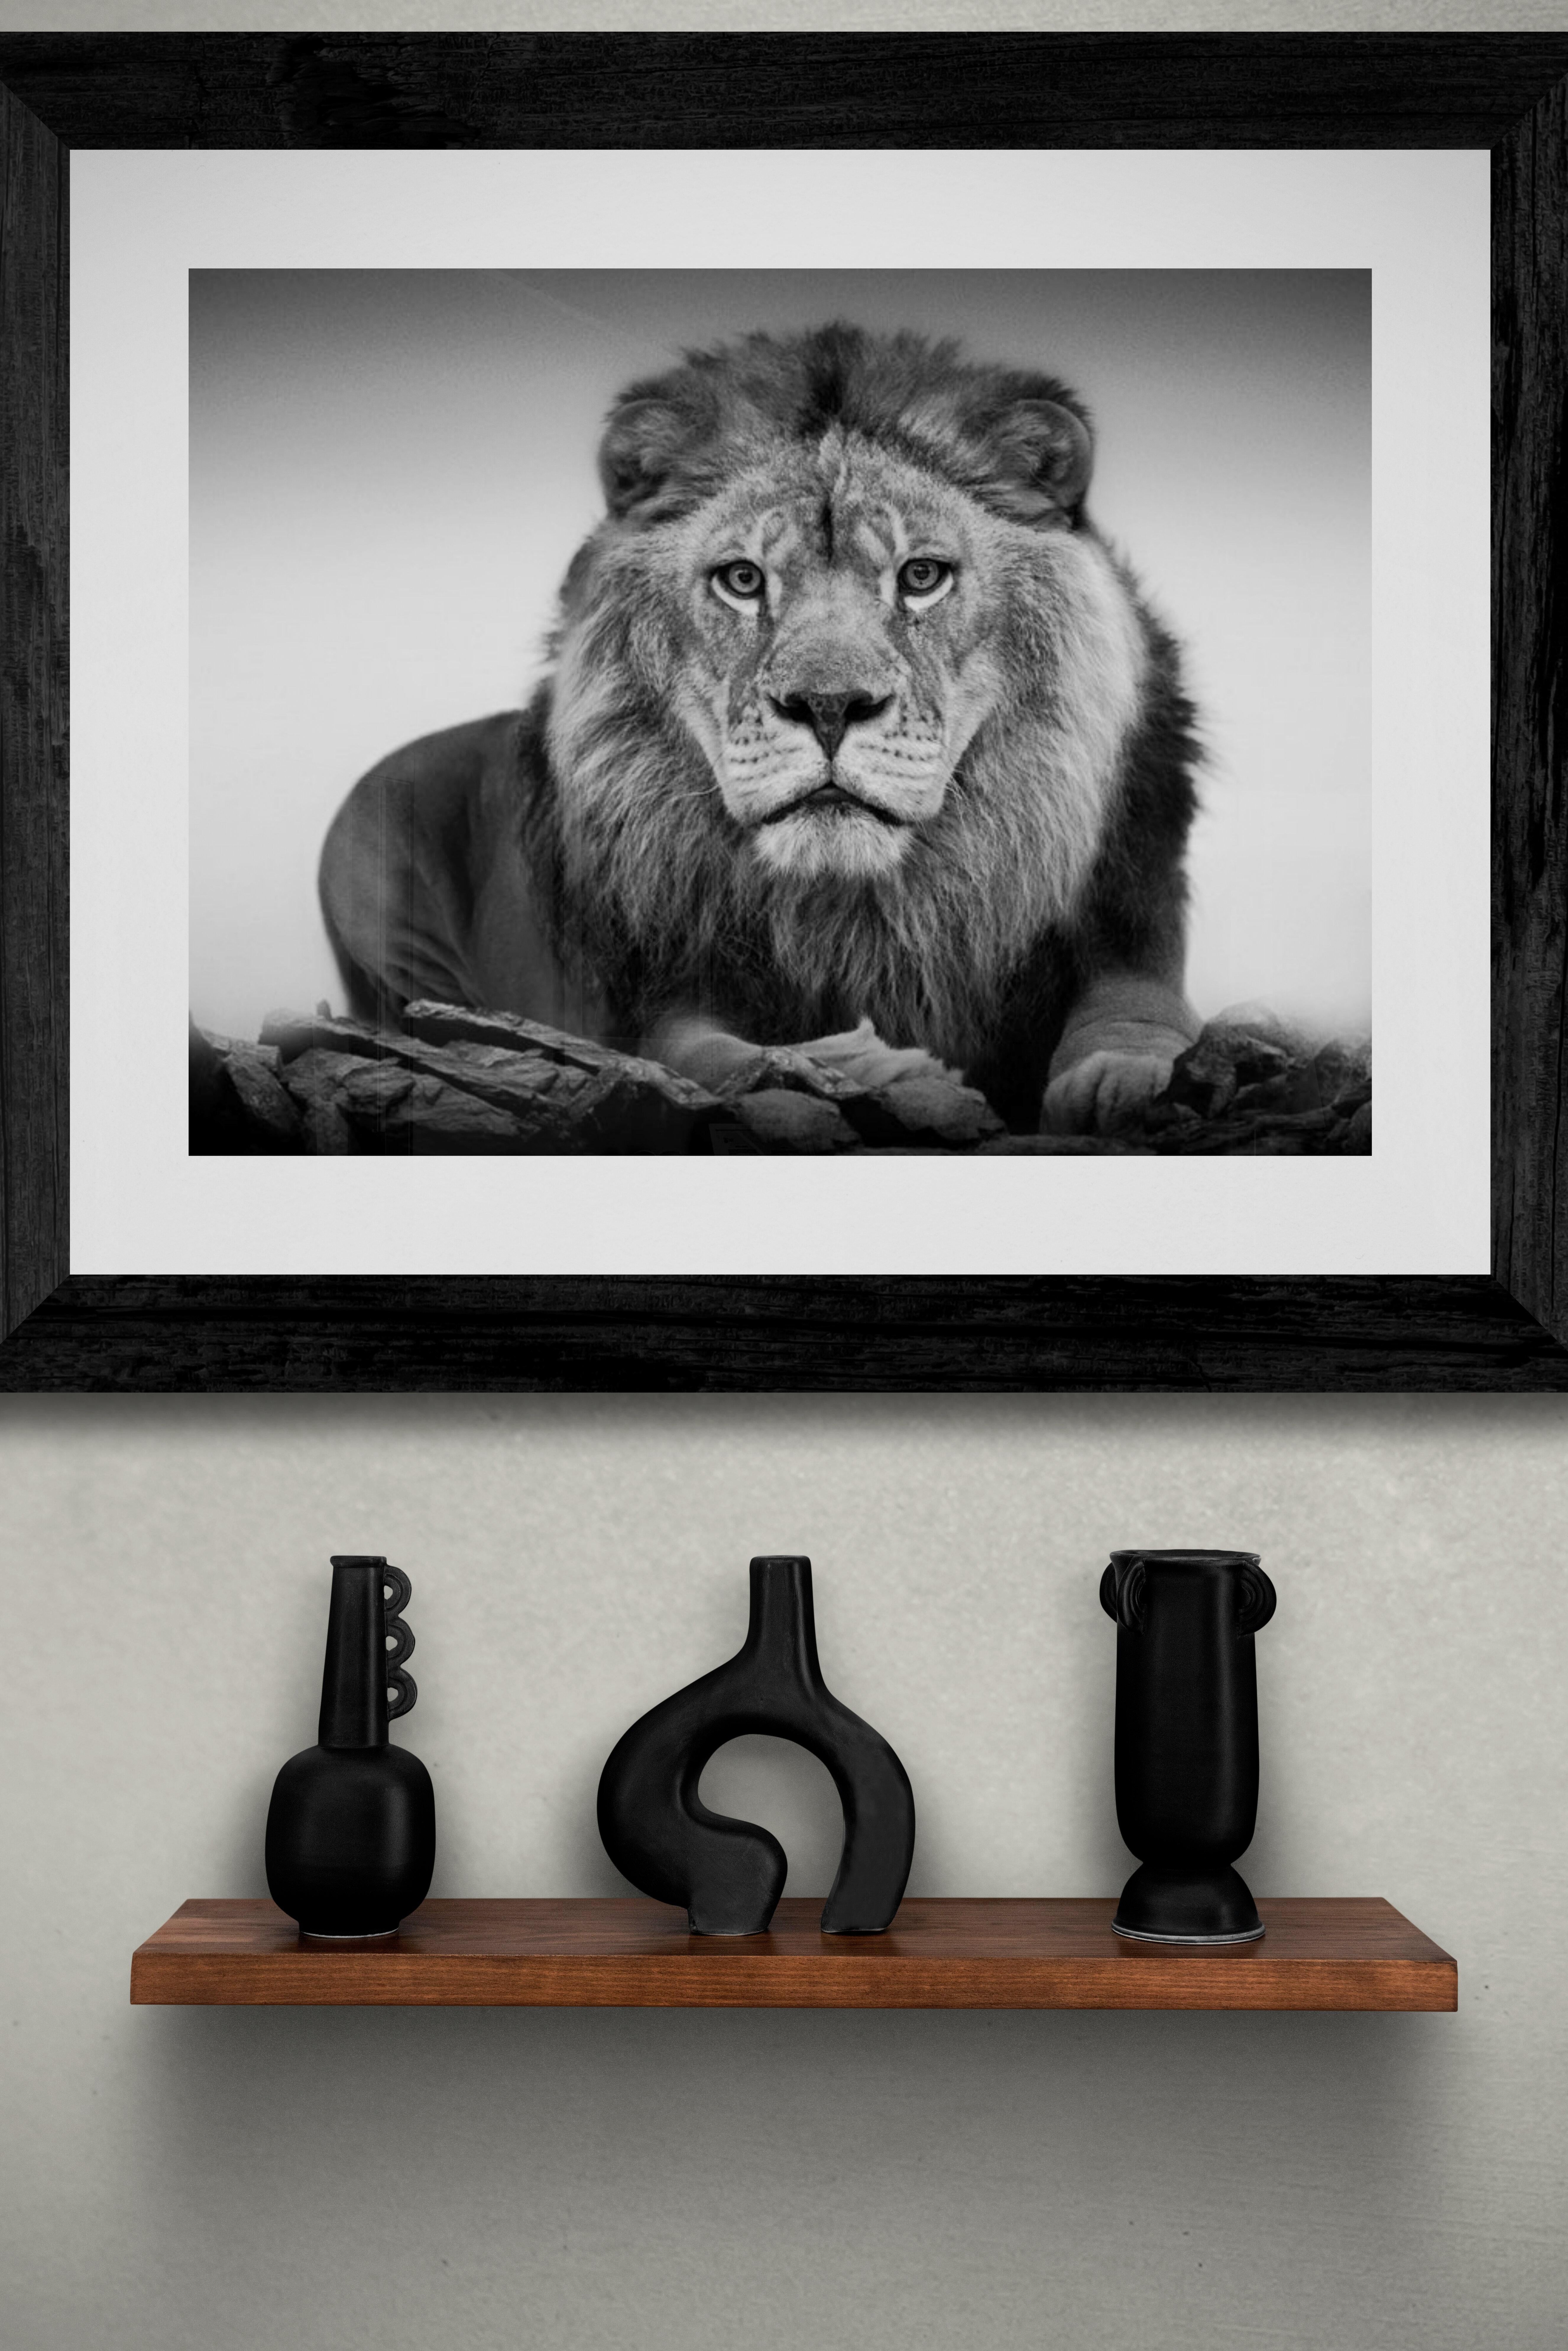 This is a contemporary photograph of an African Lion. 
40x60
Unsigned  Print
Archival Pigment print.
Framing available. Inquire for rates. 

FREE SHIPPING

Shane Russeck has built a reputation for capturing America's landscapes, cultures and